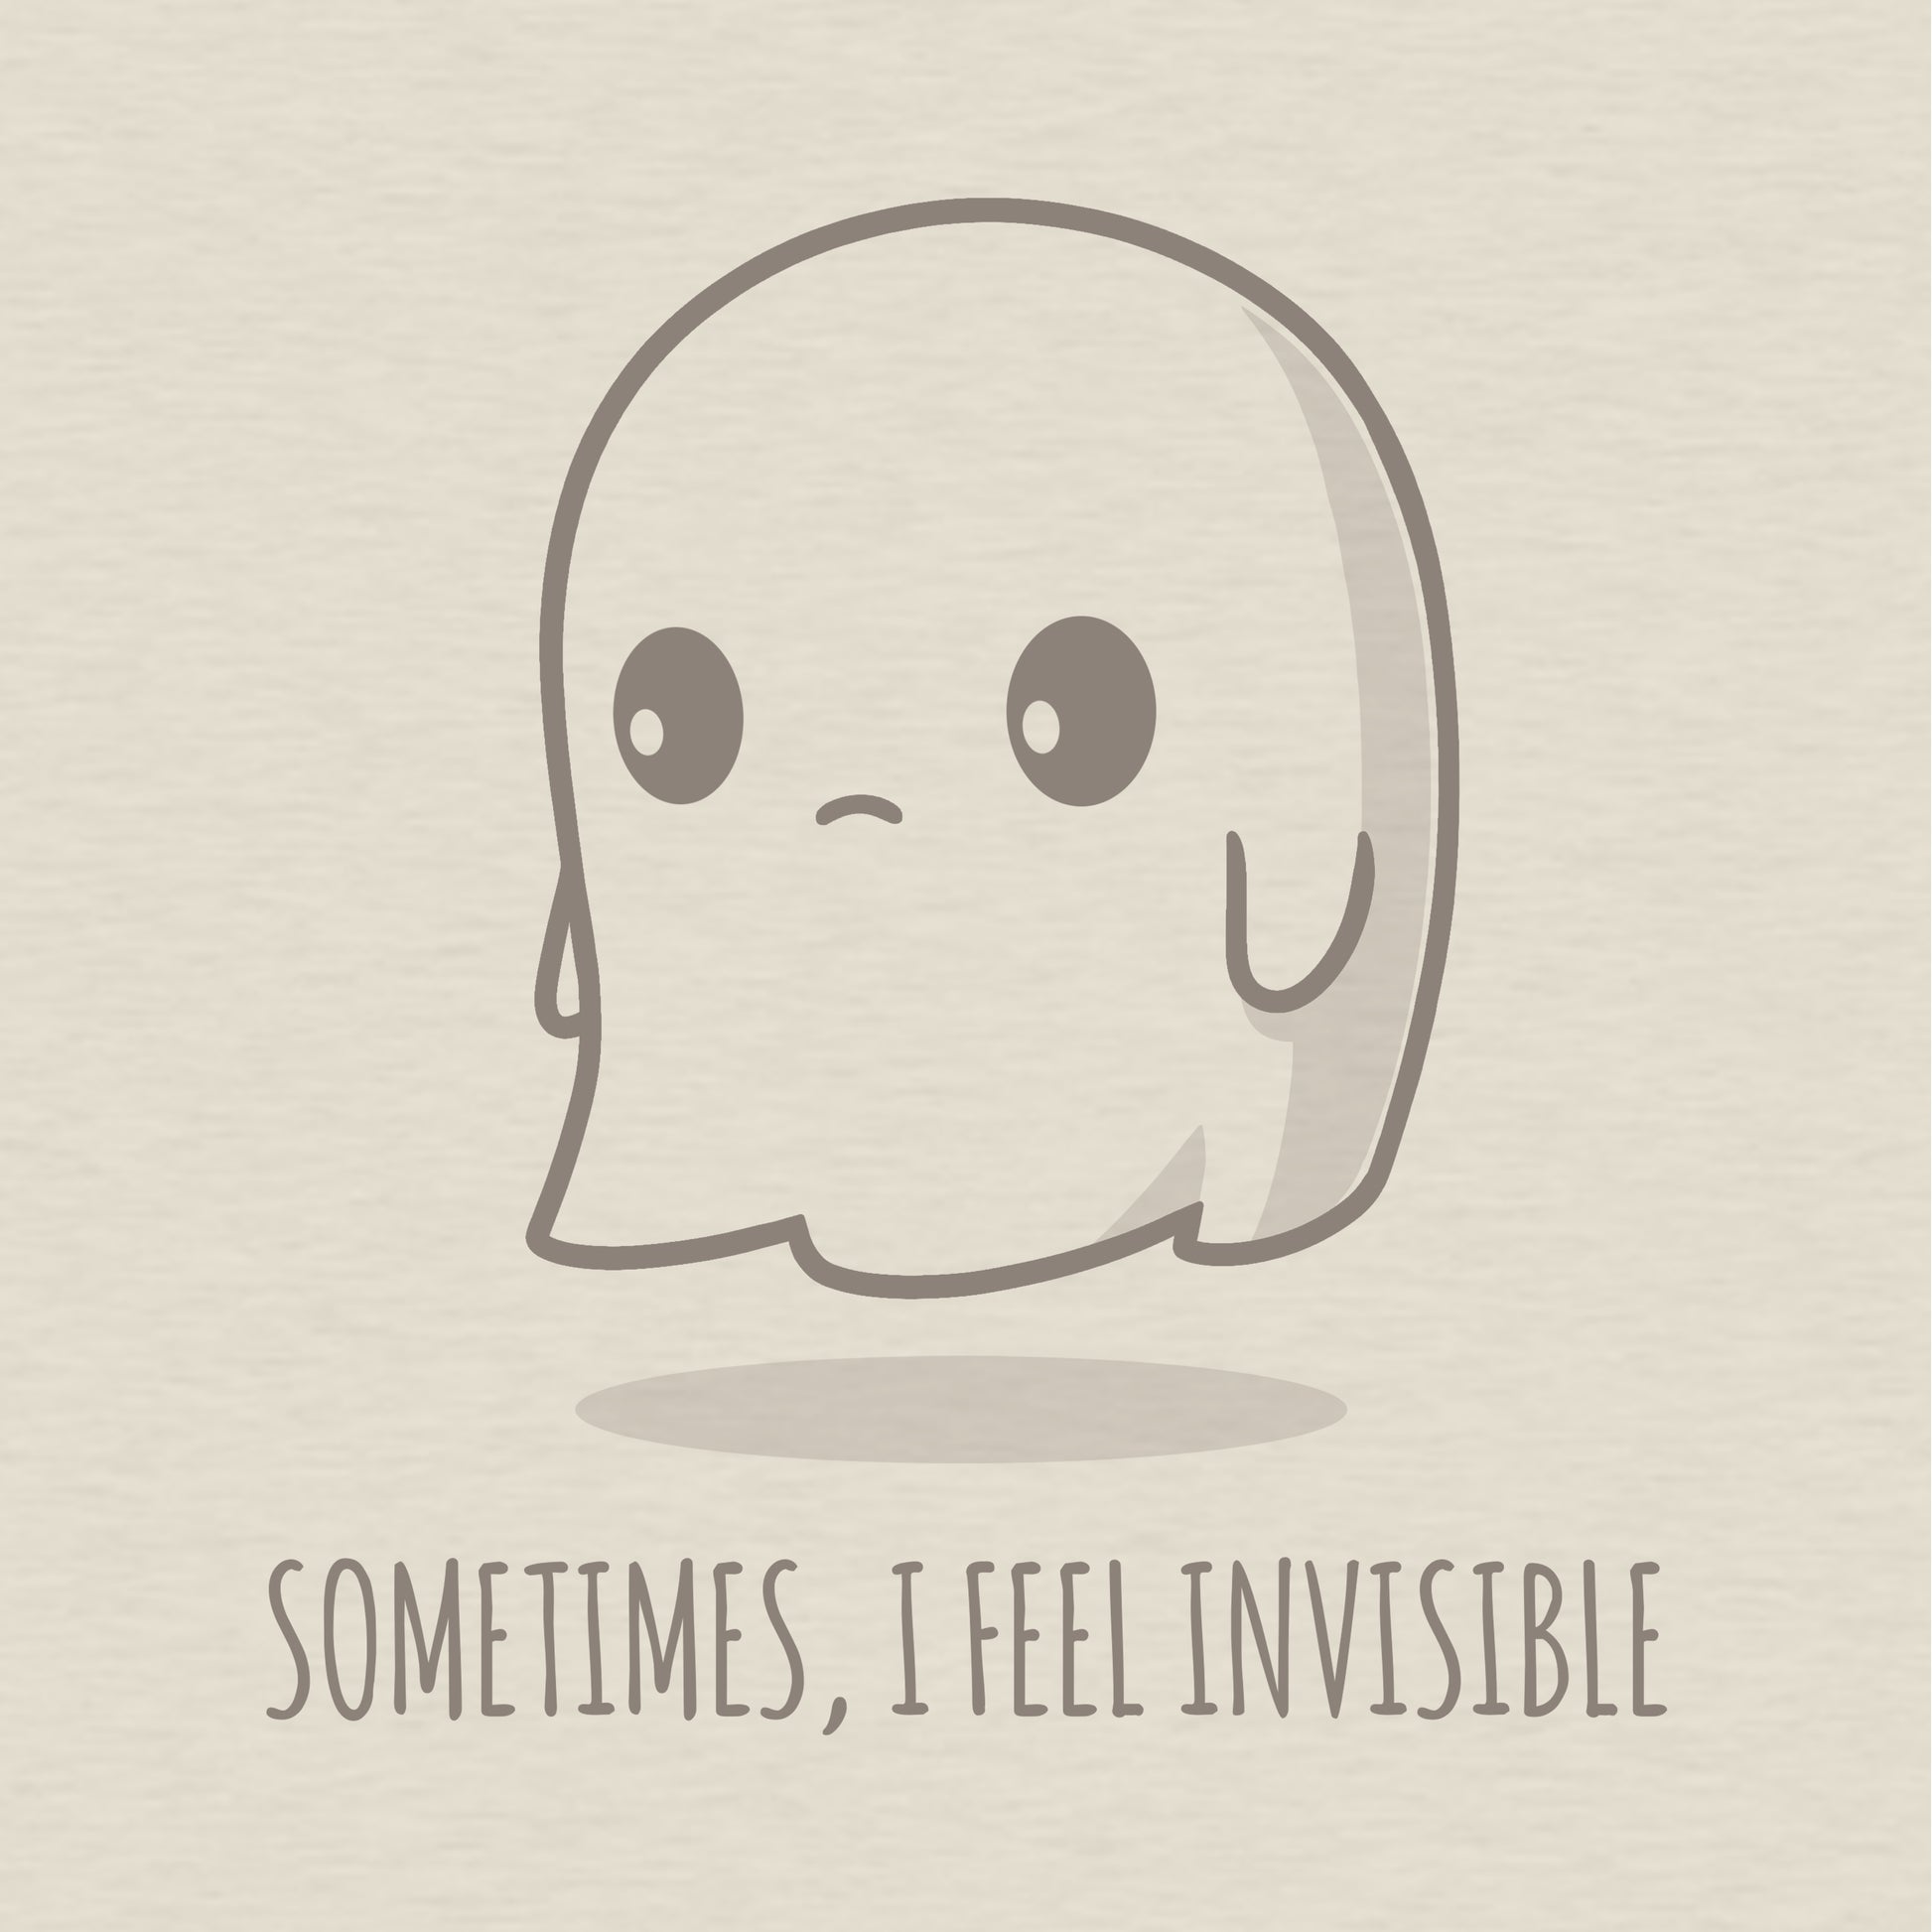 A comfortable "Sometimes, I Feel Invisible" t-shirt featuring a TeeTurtle sometimes invisible ghost.